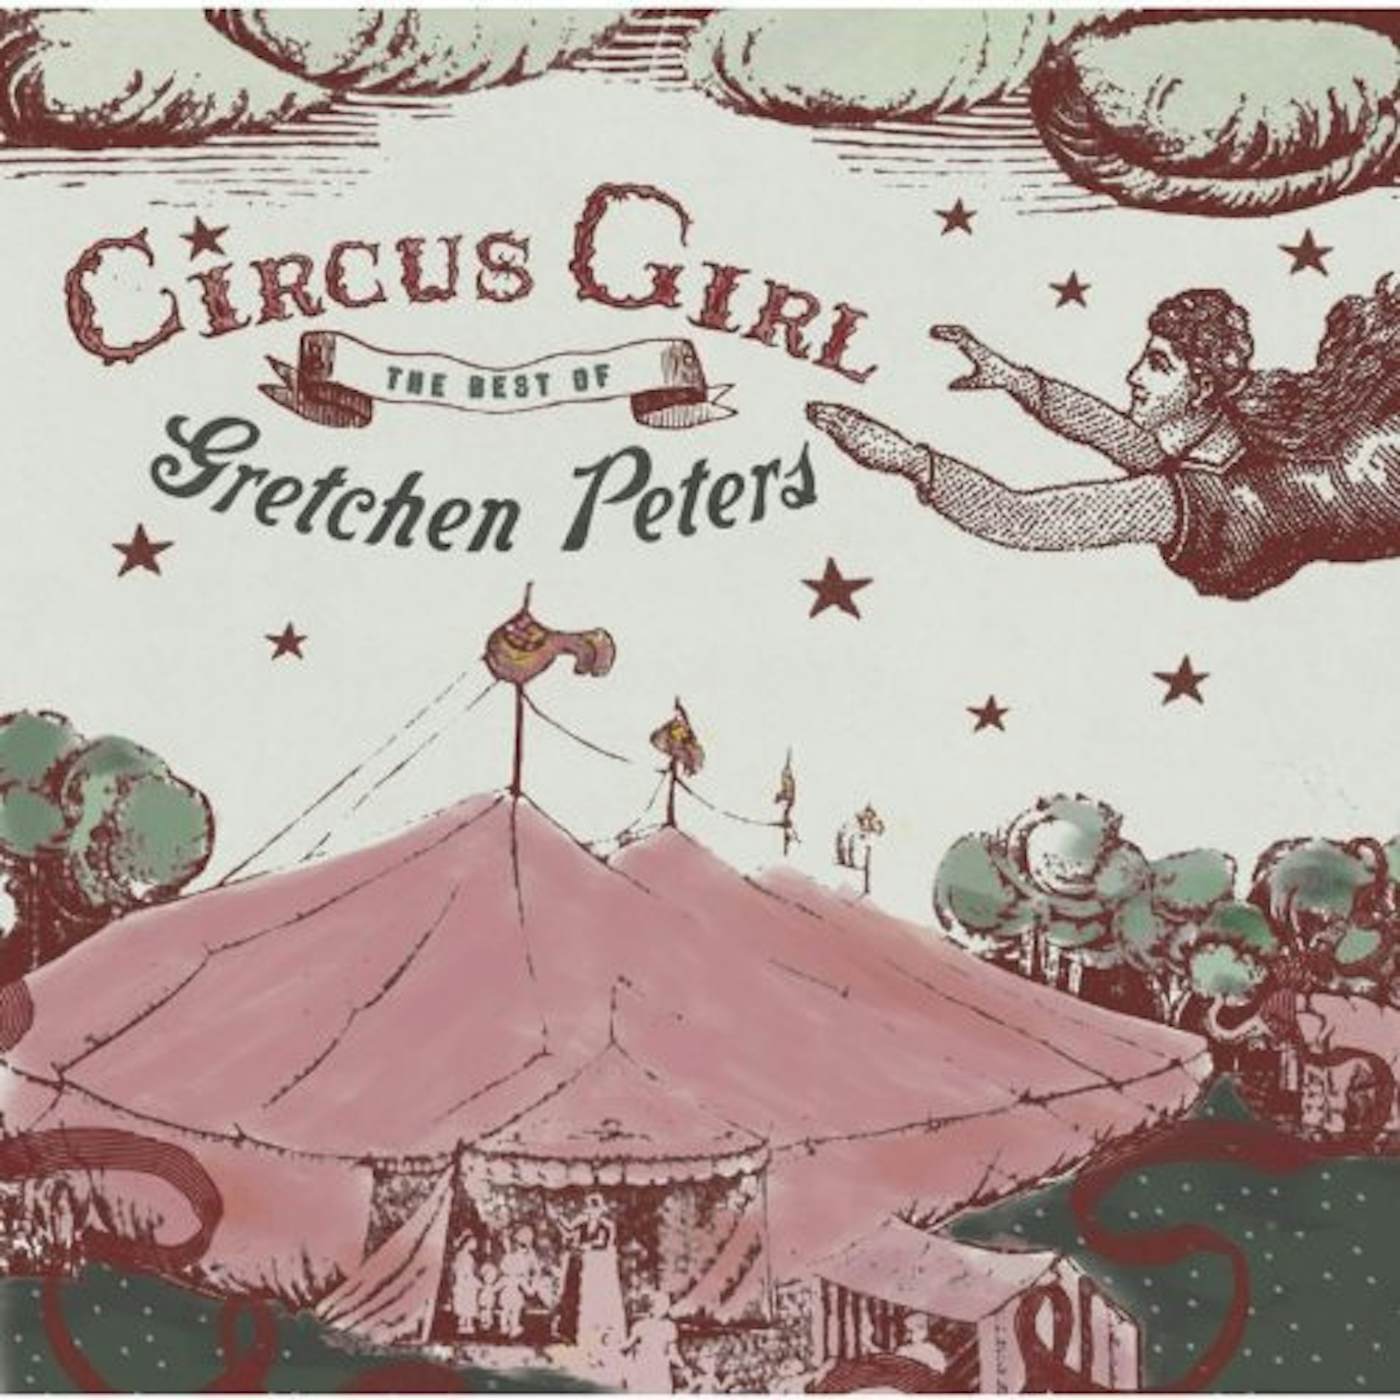 CIRCUS GIRL: BEST OF GRETCHEN PETERS CD